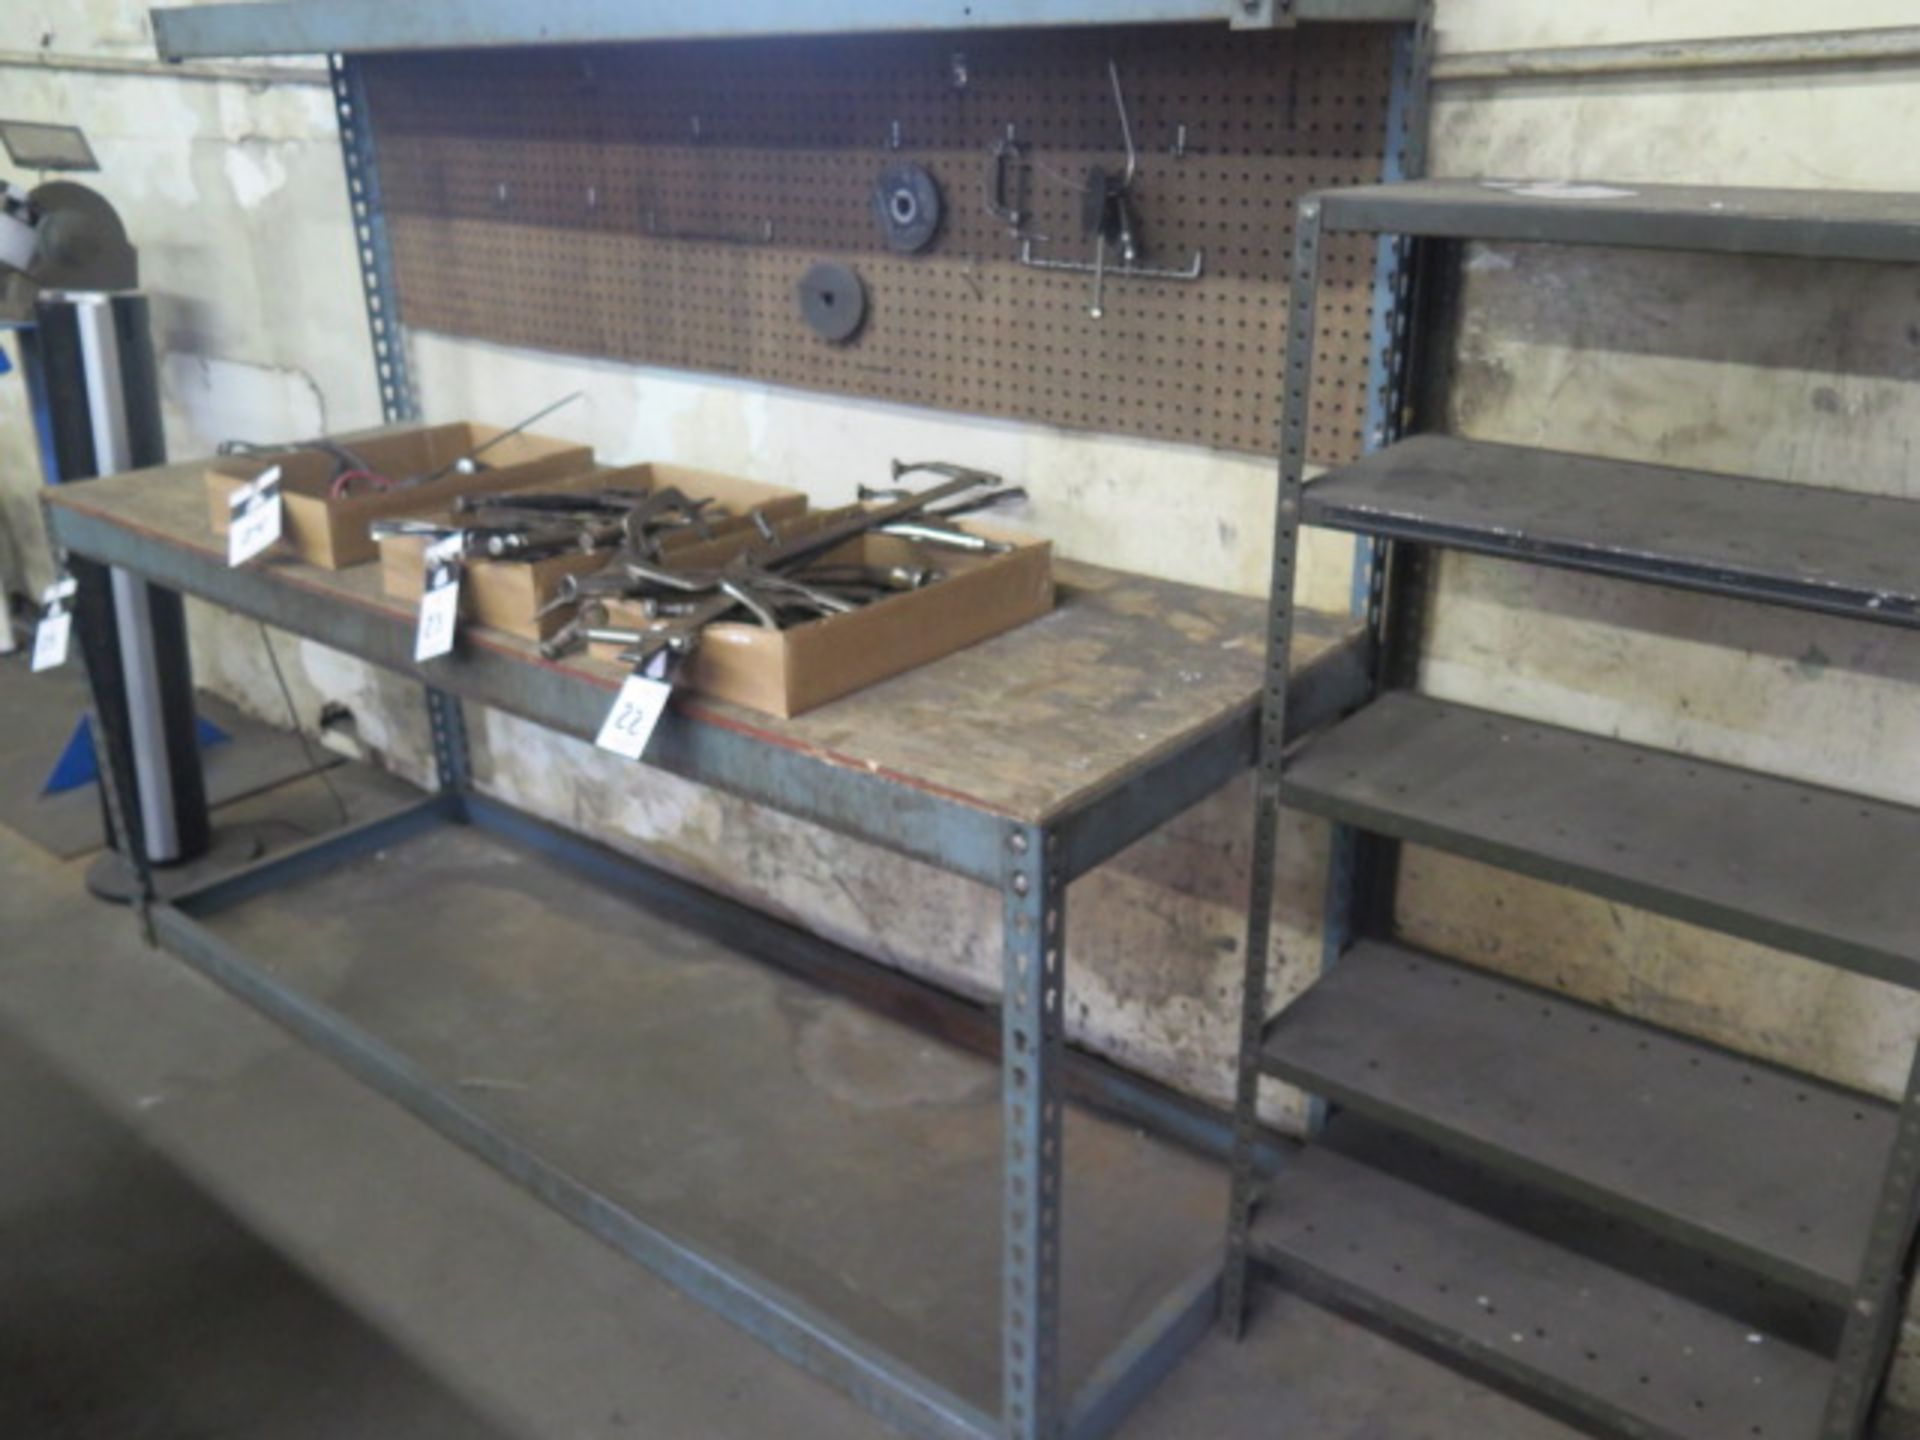 Work Bench (SOLD AS-IS - NO WARRANTY)